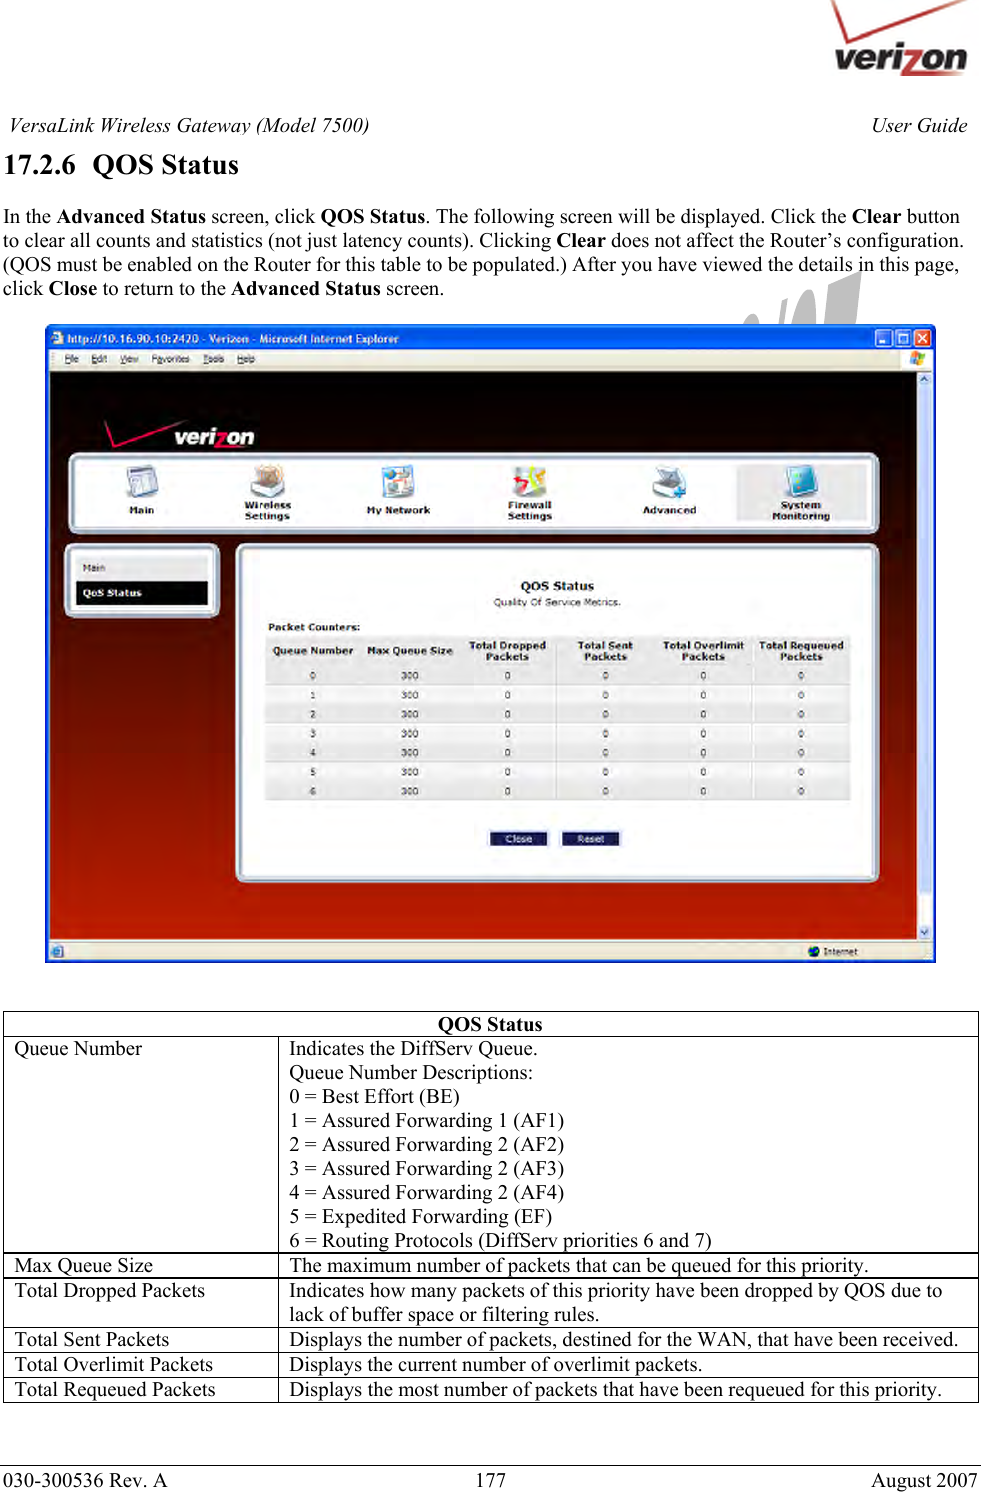       030-300536 Rev. A  177     August 2007 User GuideVersaLink Wireless Gateway (Model 7500)17.2.6   QOS Status  In the Advanced Status screen, click QOS Status. The following screen will be displayed. Click the Clear button to clear all counts and statistics (not just latency counts). Clicking Clear does not affect the Router’s configuration. (QOS must be enabled on the Router for this table to be populated.) After you have viewed the details in this page, click Close to return to the Advanced Status screen.     QOS Status Queue Number  Indicates the DiffServ Queue.  Queue Number Descriptions: 0 = Best Effort (BE) 1 = Assured Forwarding 1 (AF1) 2 = Assured Forwarding 2 (AF2) 3 = Assured Forwarding 2 (AF3) 4 = Assured Forwarding 2 (AF4) 5 = Expedited Forwarding (EF) 6 = Routing Protocols (DiffServ priorities 6 and 7) Max Queue Size  The maximum number of packets that can be queued for this priority. Total Dropped Packets  Indicates how many packets of this priority have been dropped by QOS due to lack of buffer space or filtering rules. Total Sent Packets  Displays the number of packets, destined for the WAN, that have been received.  Total Overlimit Packets  Displays the current number of overlimit packets. Total Requeued Packets   Displays the most number of packets that have been requeued for this priority.   